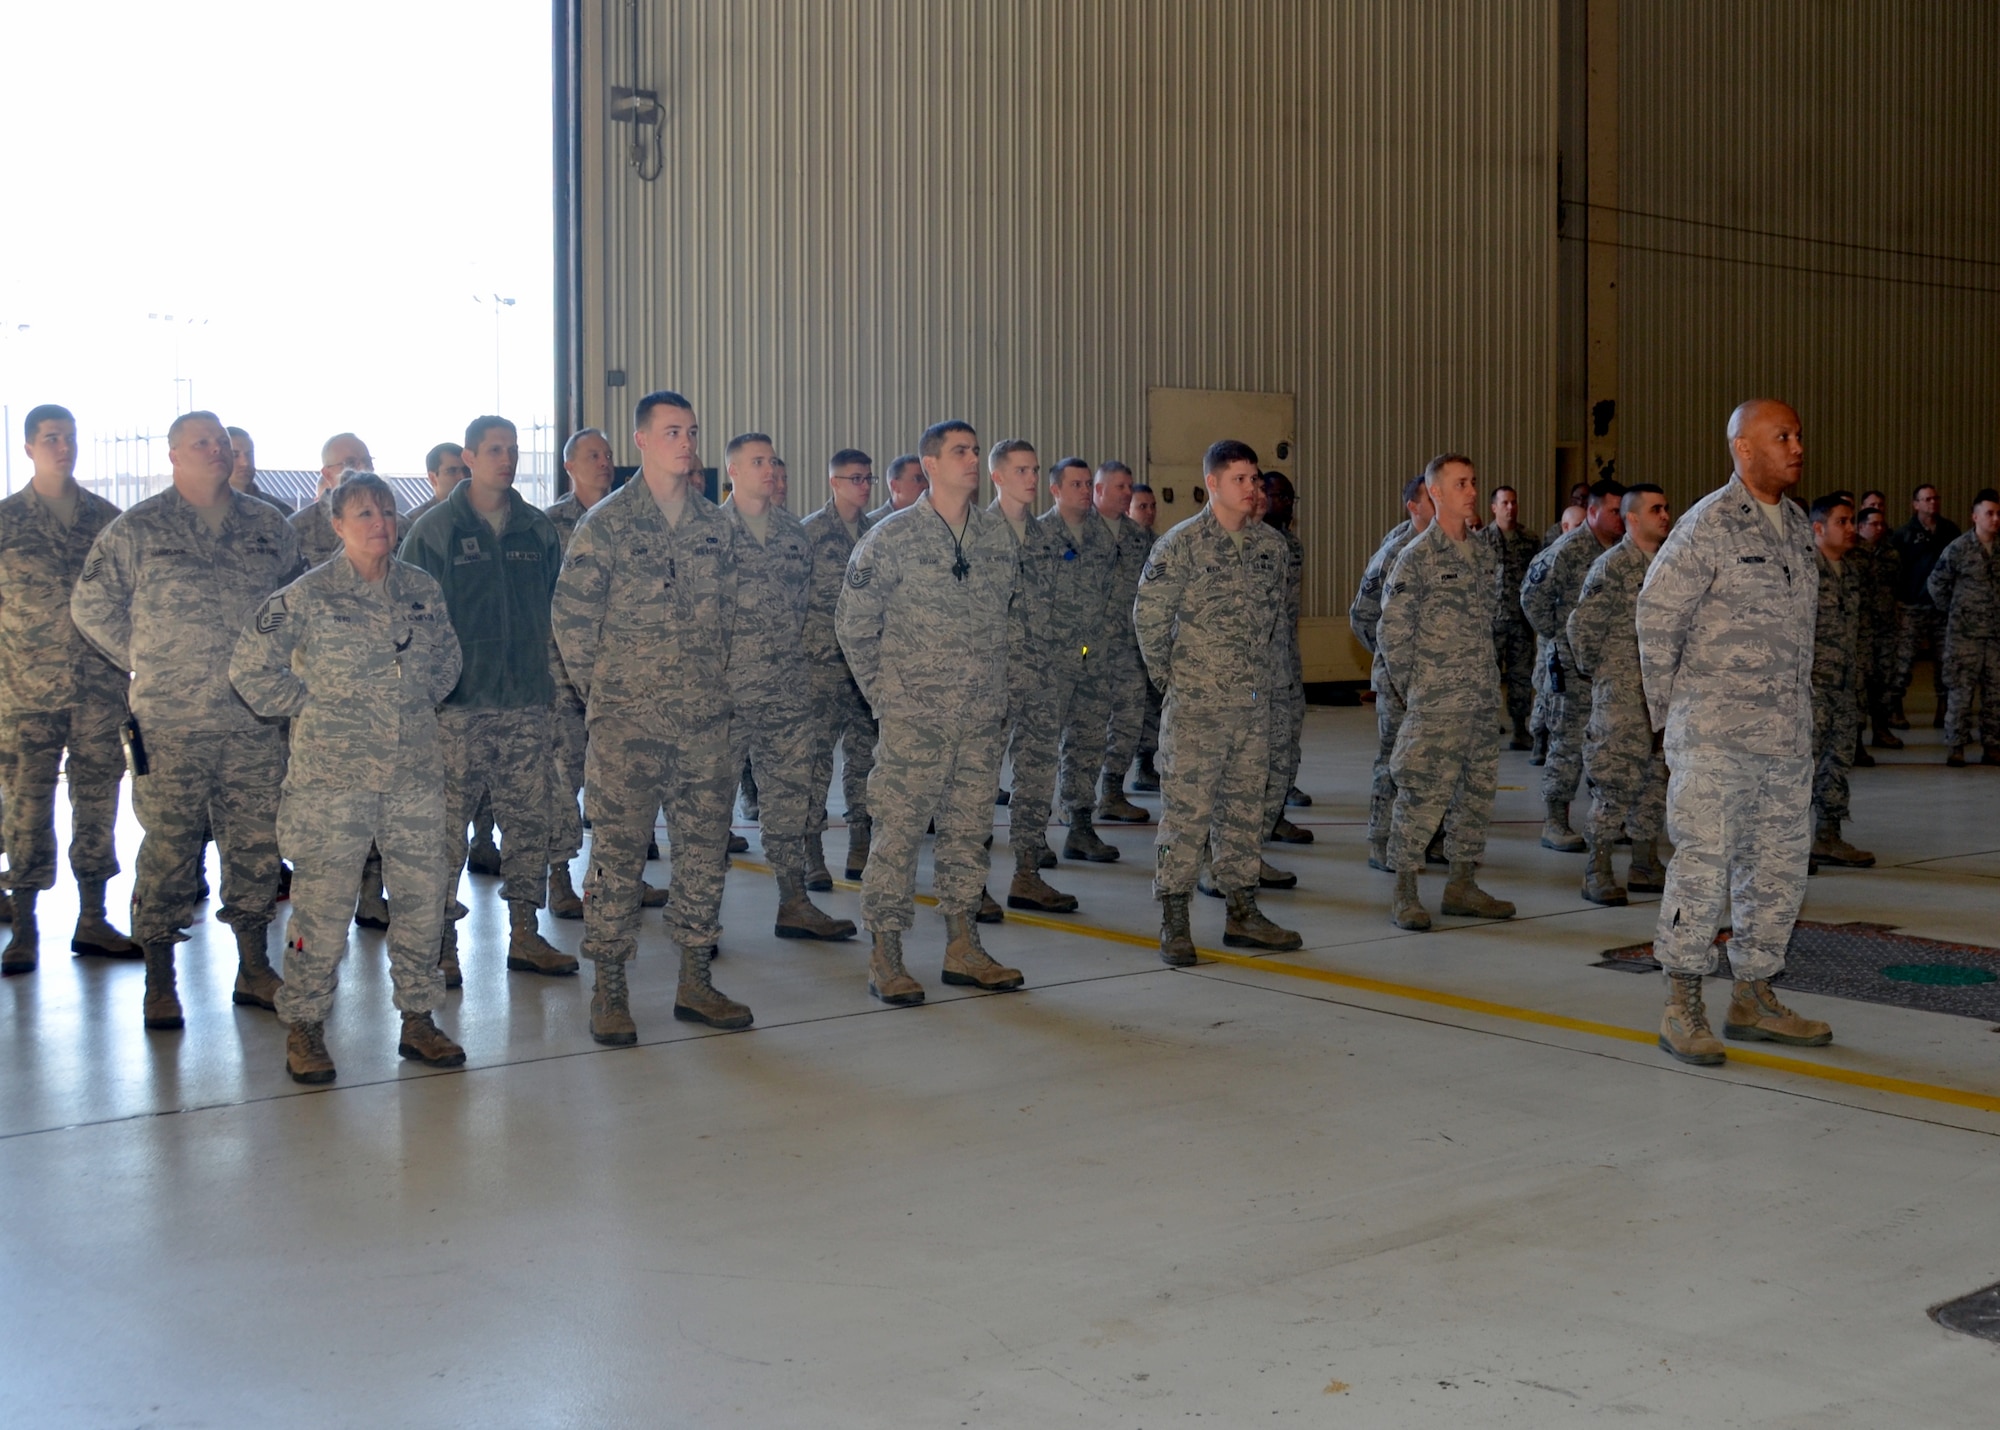 Members of the 131st Aircraft Maintenance Squadron stand in formation during Lt. Col. Matthew Calhoun’s 131st AMXS Assumption of Command ceremony at Whiteman Air Force Base, Mo., Feb. 7, 2015.